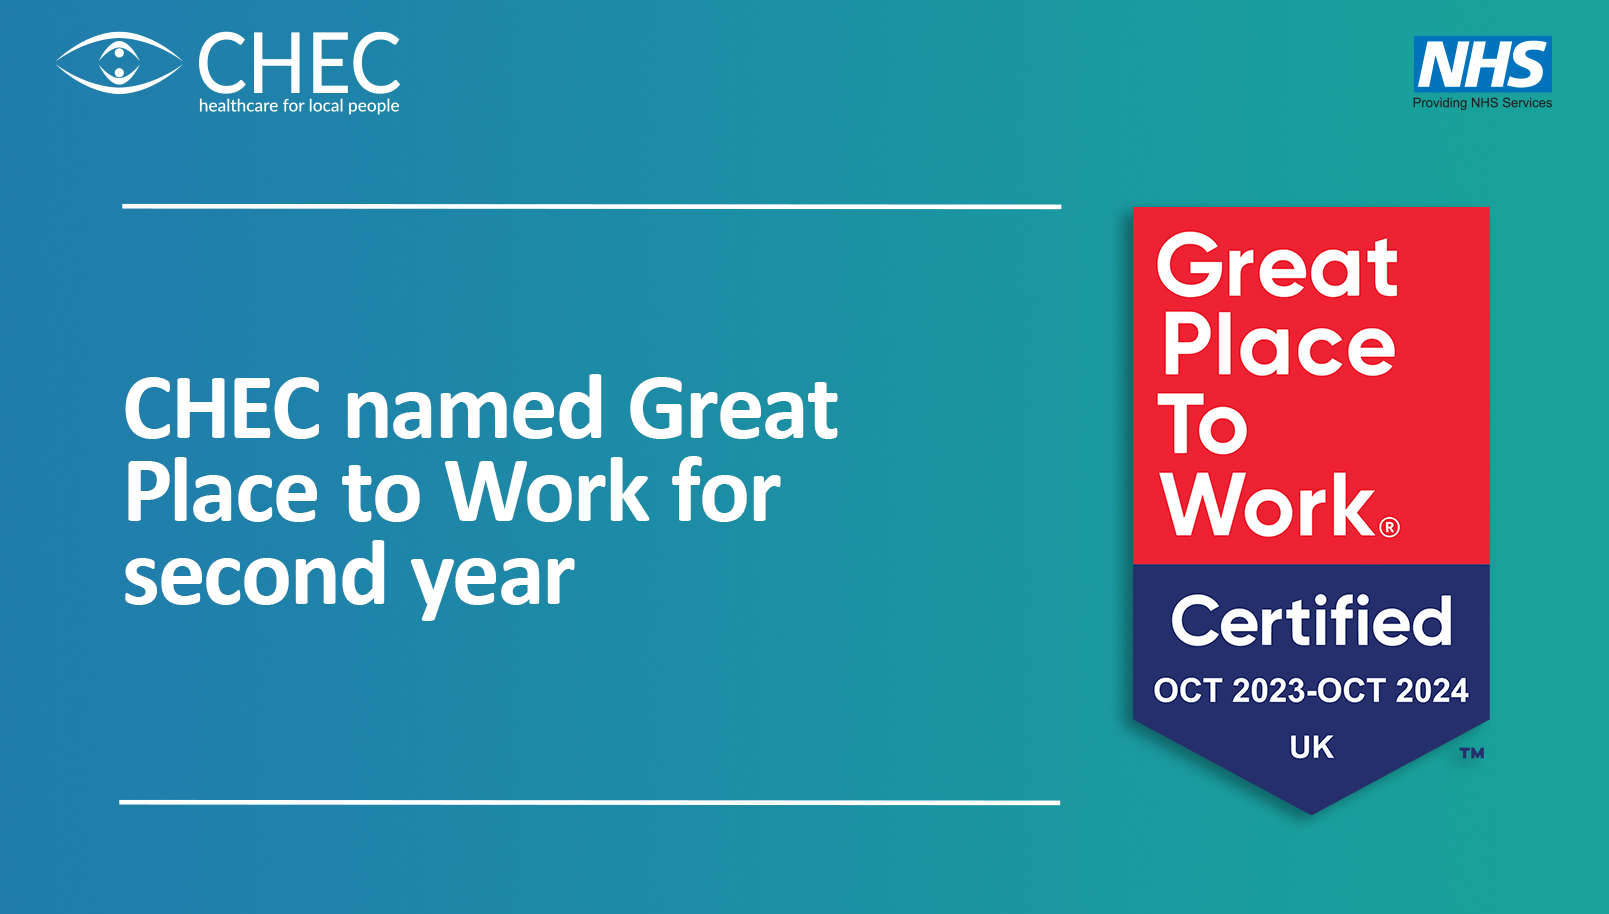 chec named great place to work for second year